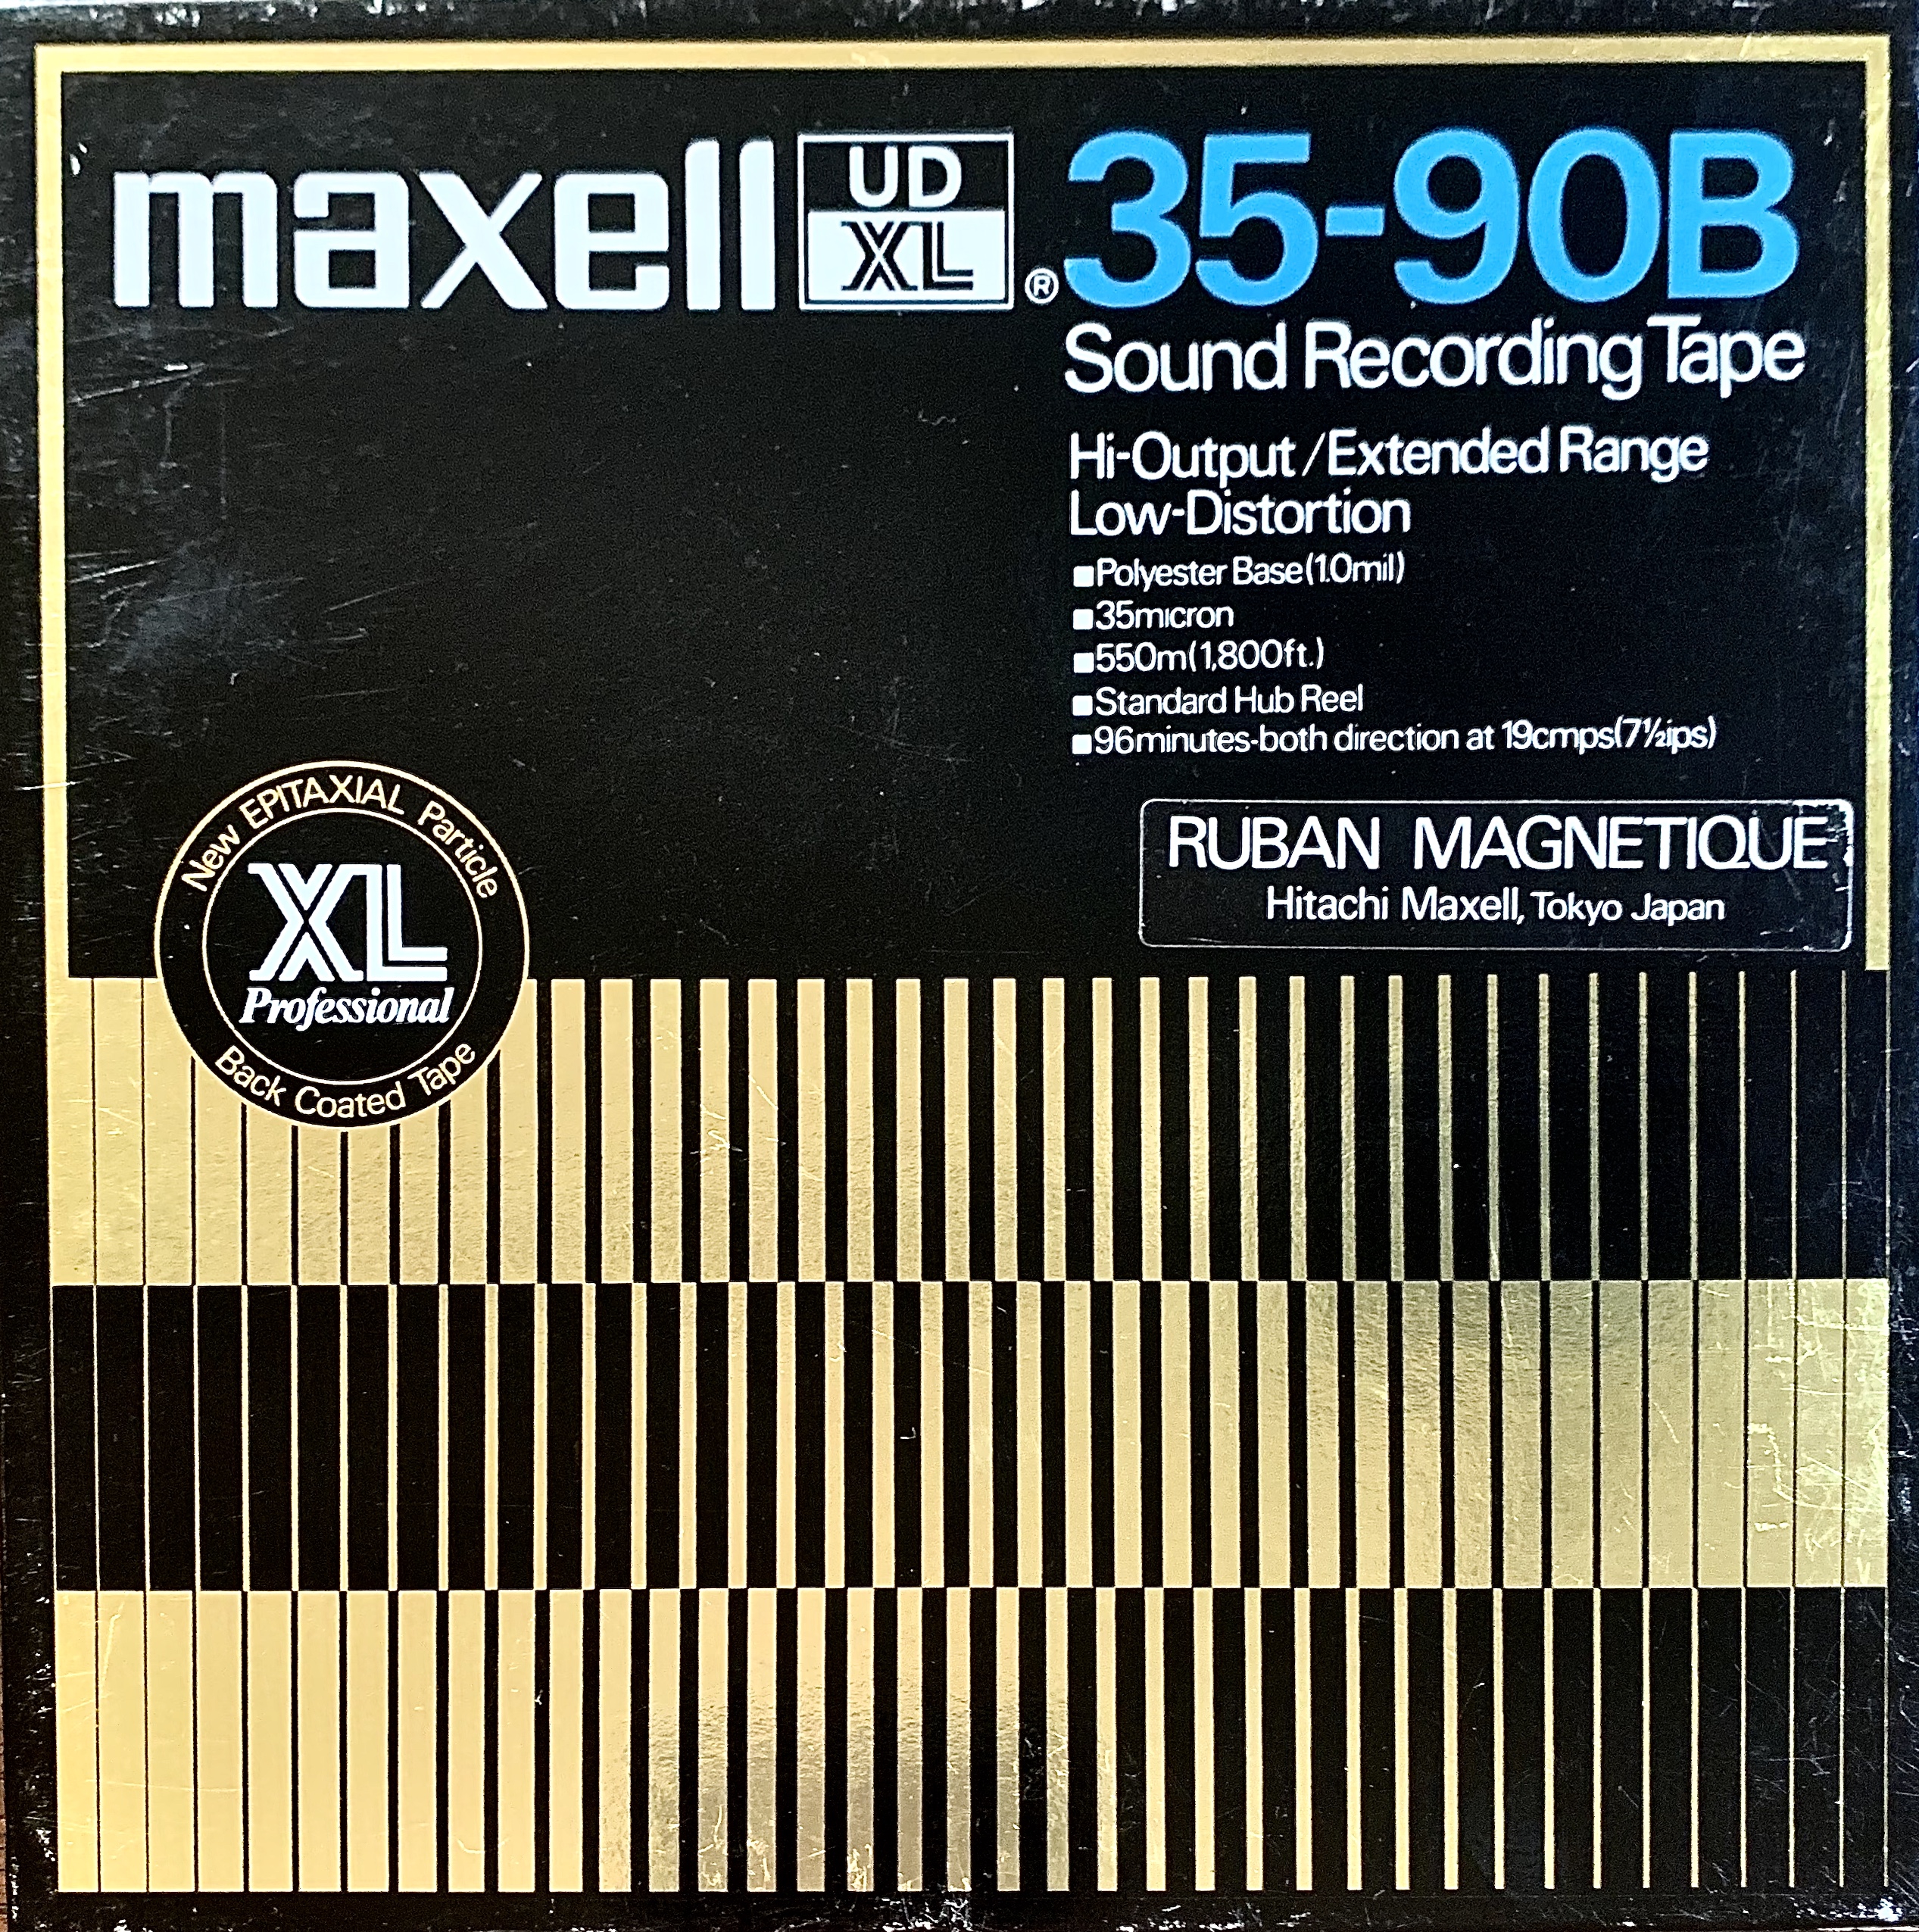 Maxell XLI 35-180B Reel To Reel Tape (NOS) Photo #1173504 - Canuck Audio  Mart